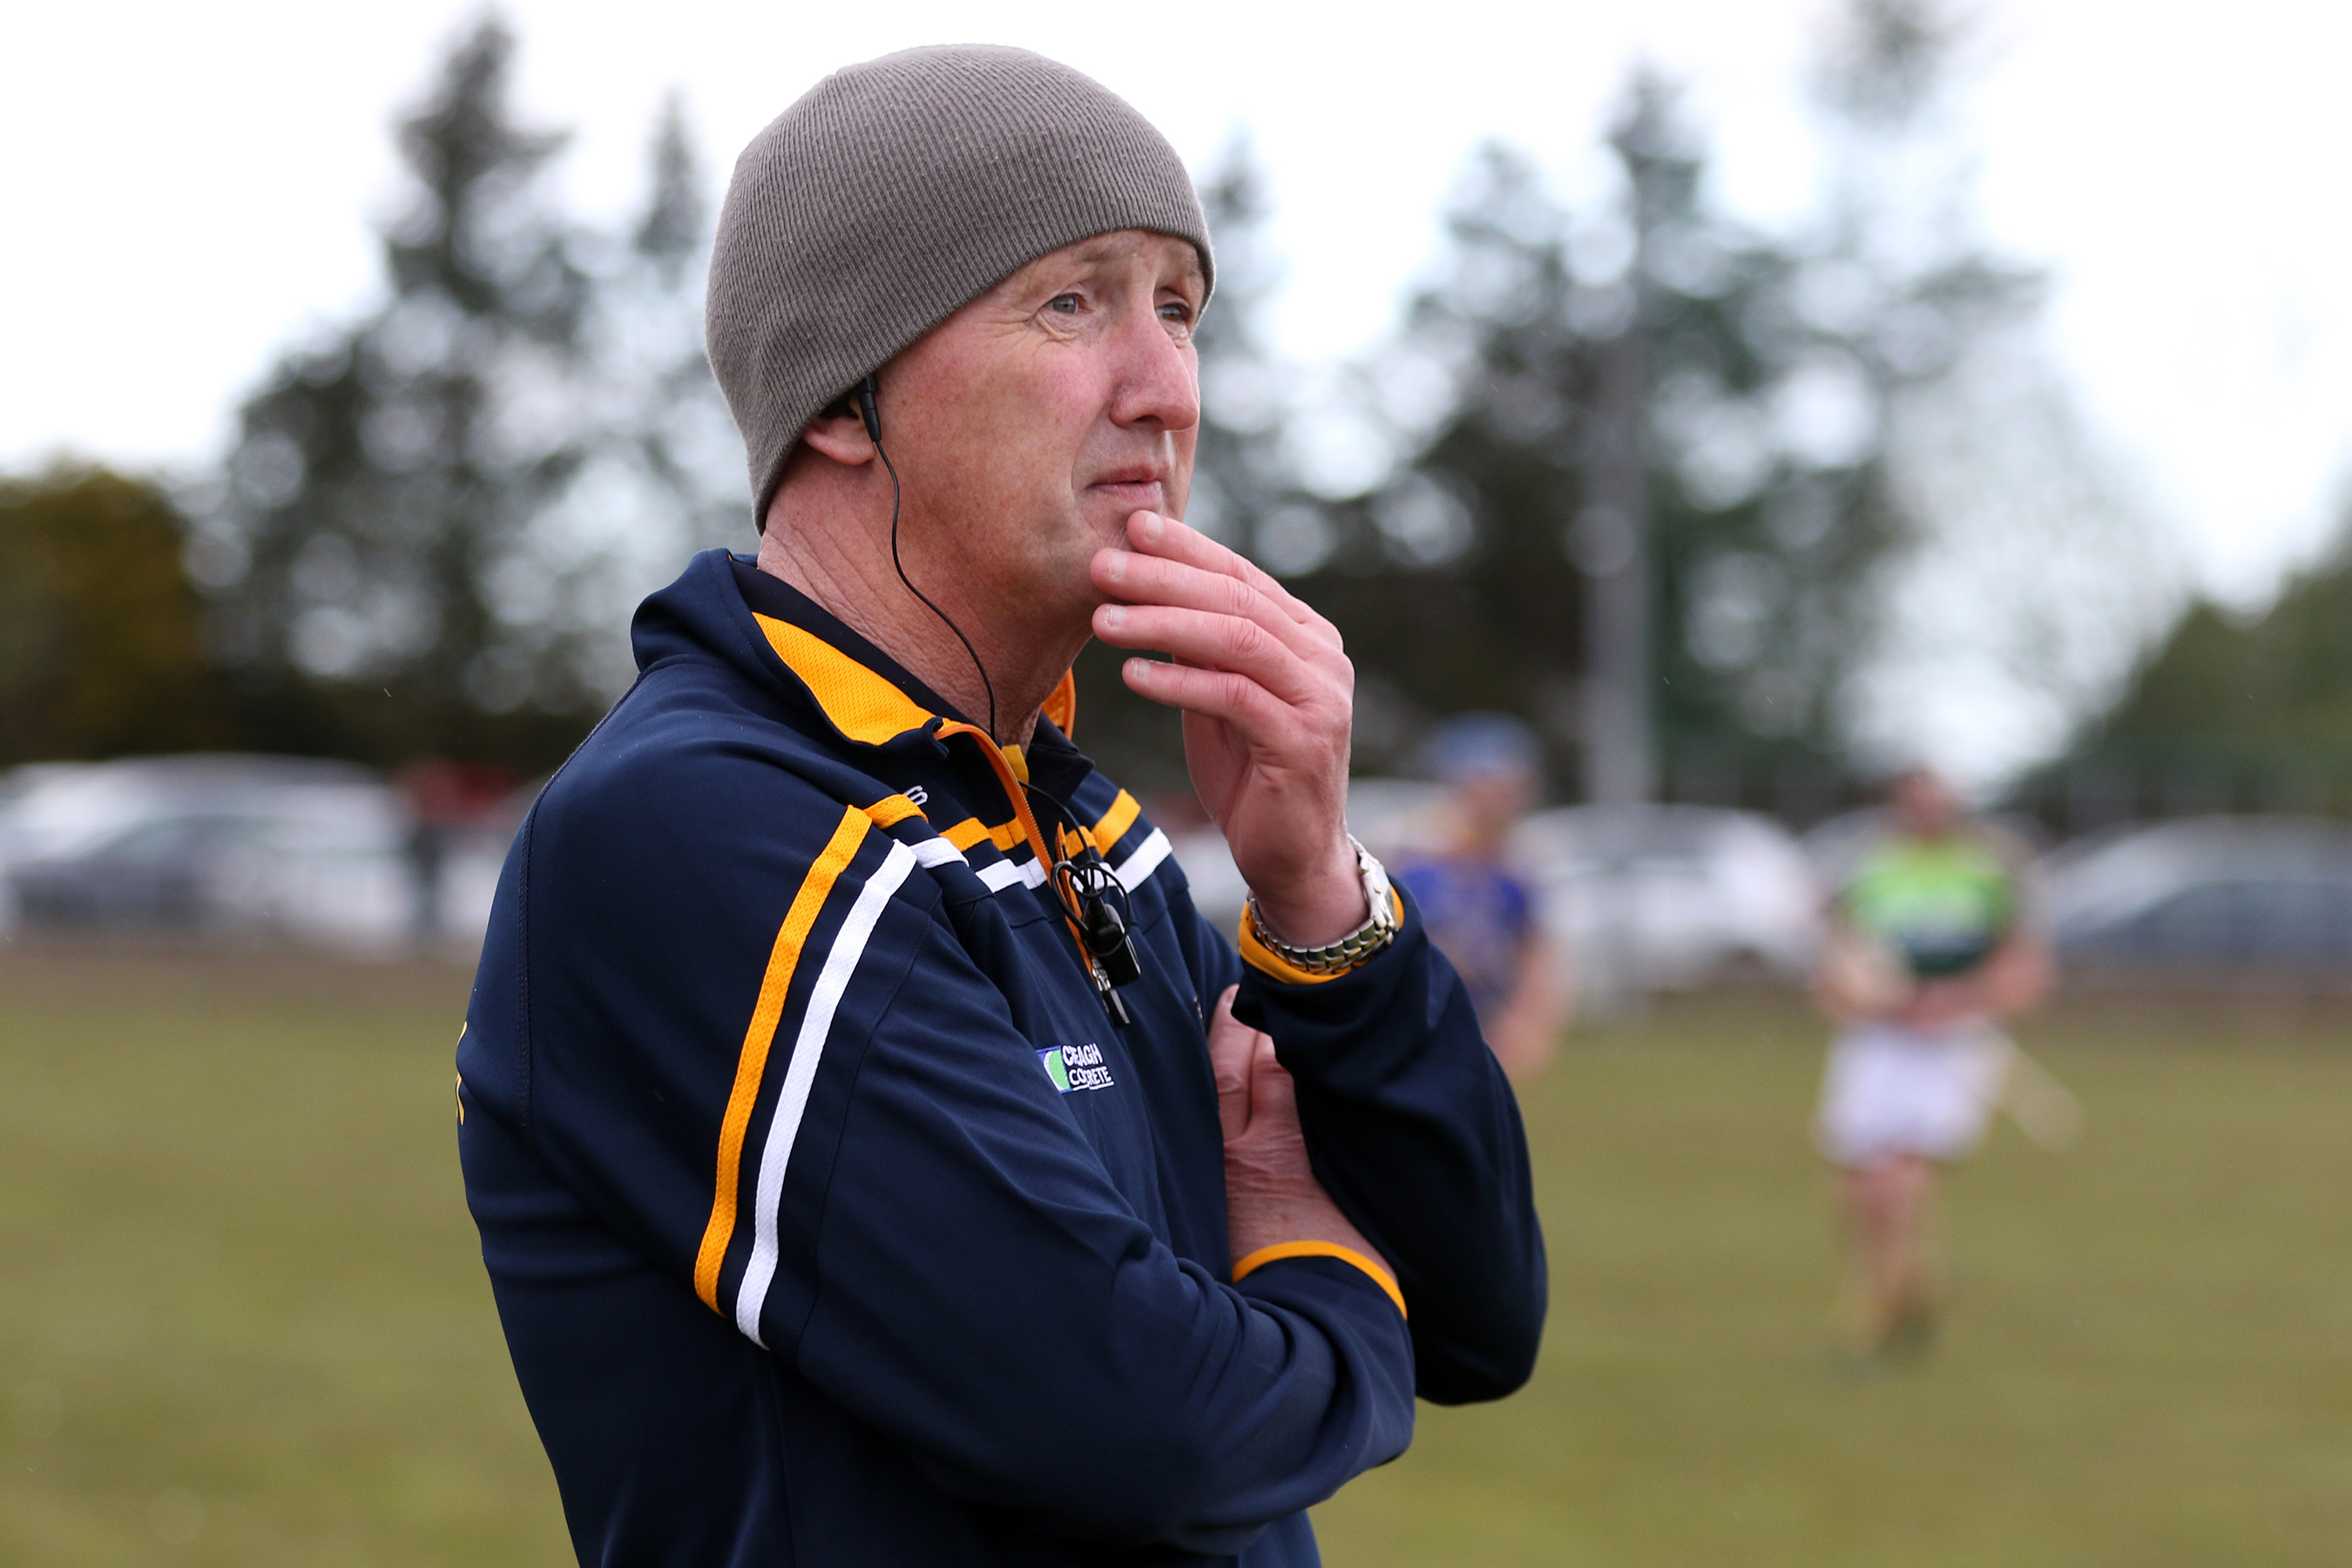 Antrim manager Dominic McKinley is expecting a close game when his side take on Down in the Christy Ring Cup semi-final in Loughgiel this Saturday